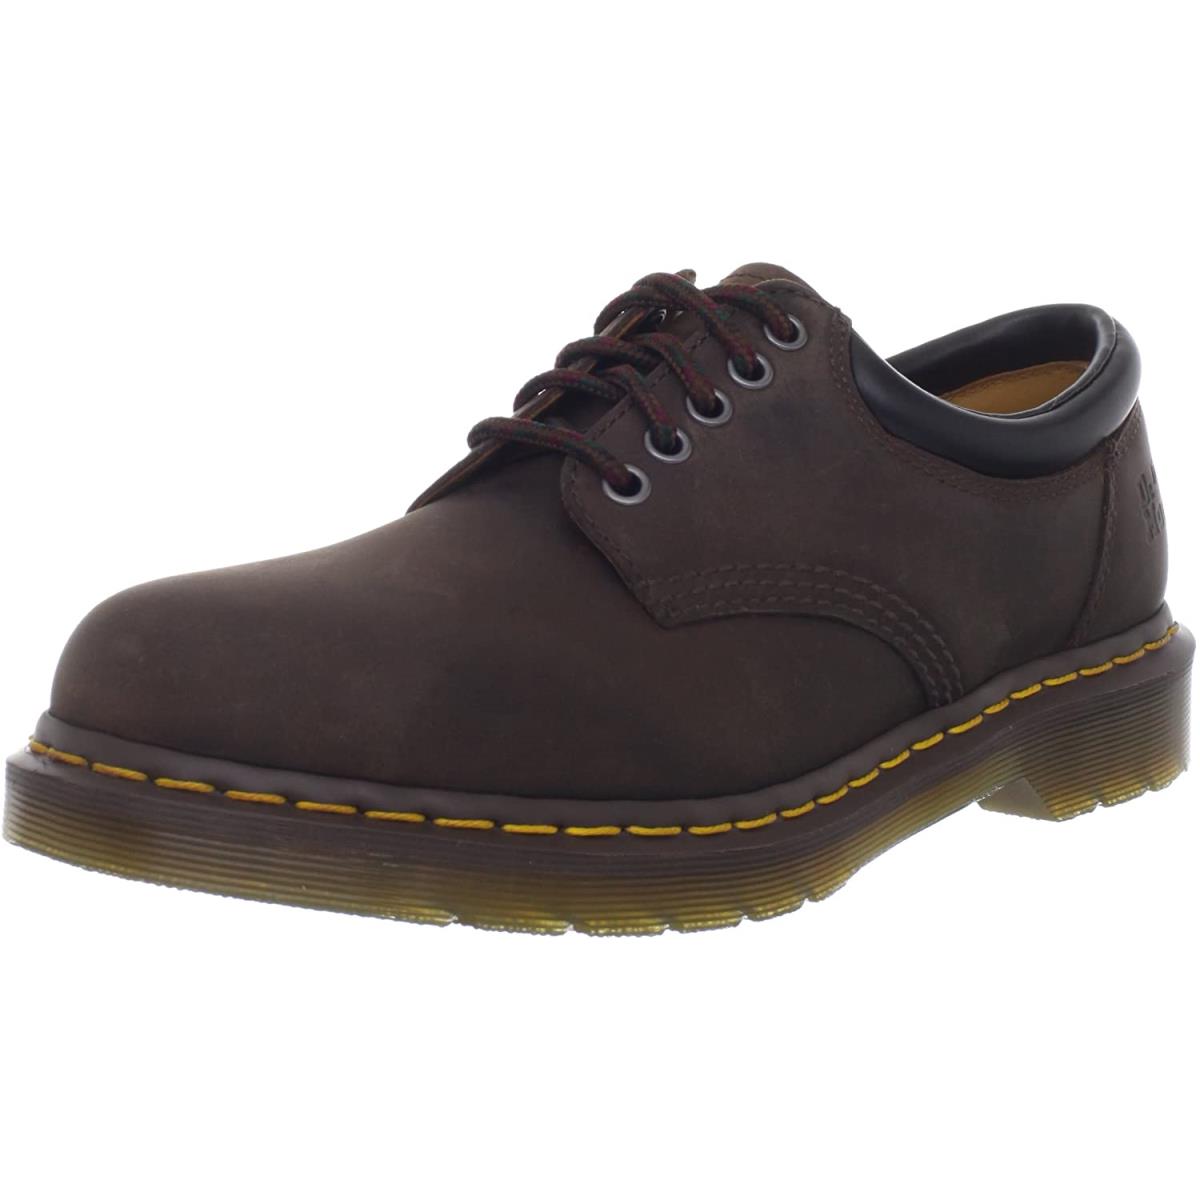 Dr. Martens Unisex-adult 8053 5 Eye Padded Collar Boot Gaucho Crazy Horse